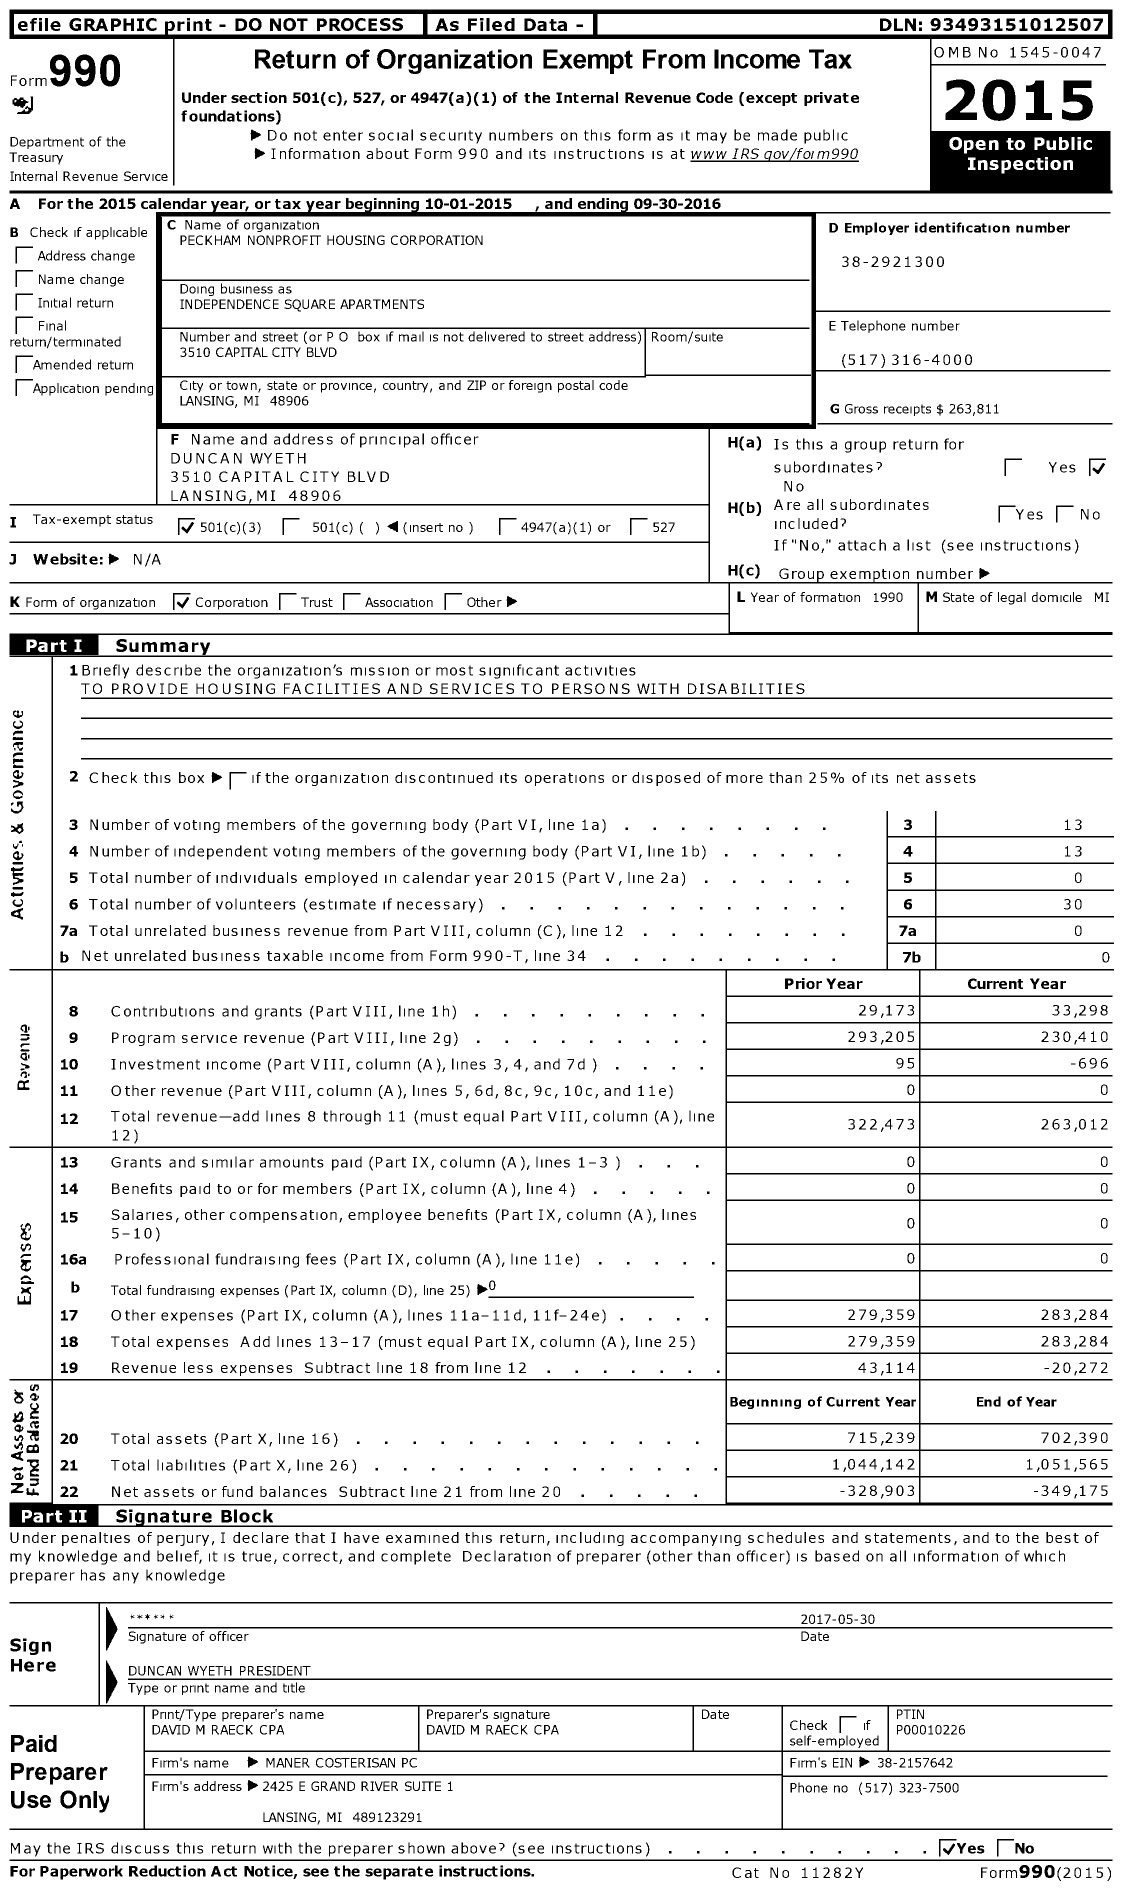 Image of first page of 2015 Form 990 for Independence Square Apartments / Peckham Nonprofit Housing Corporation